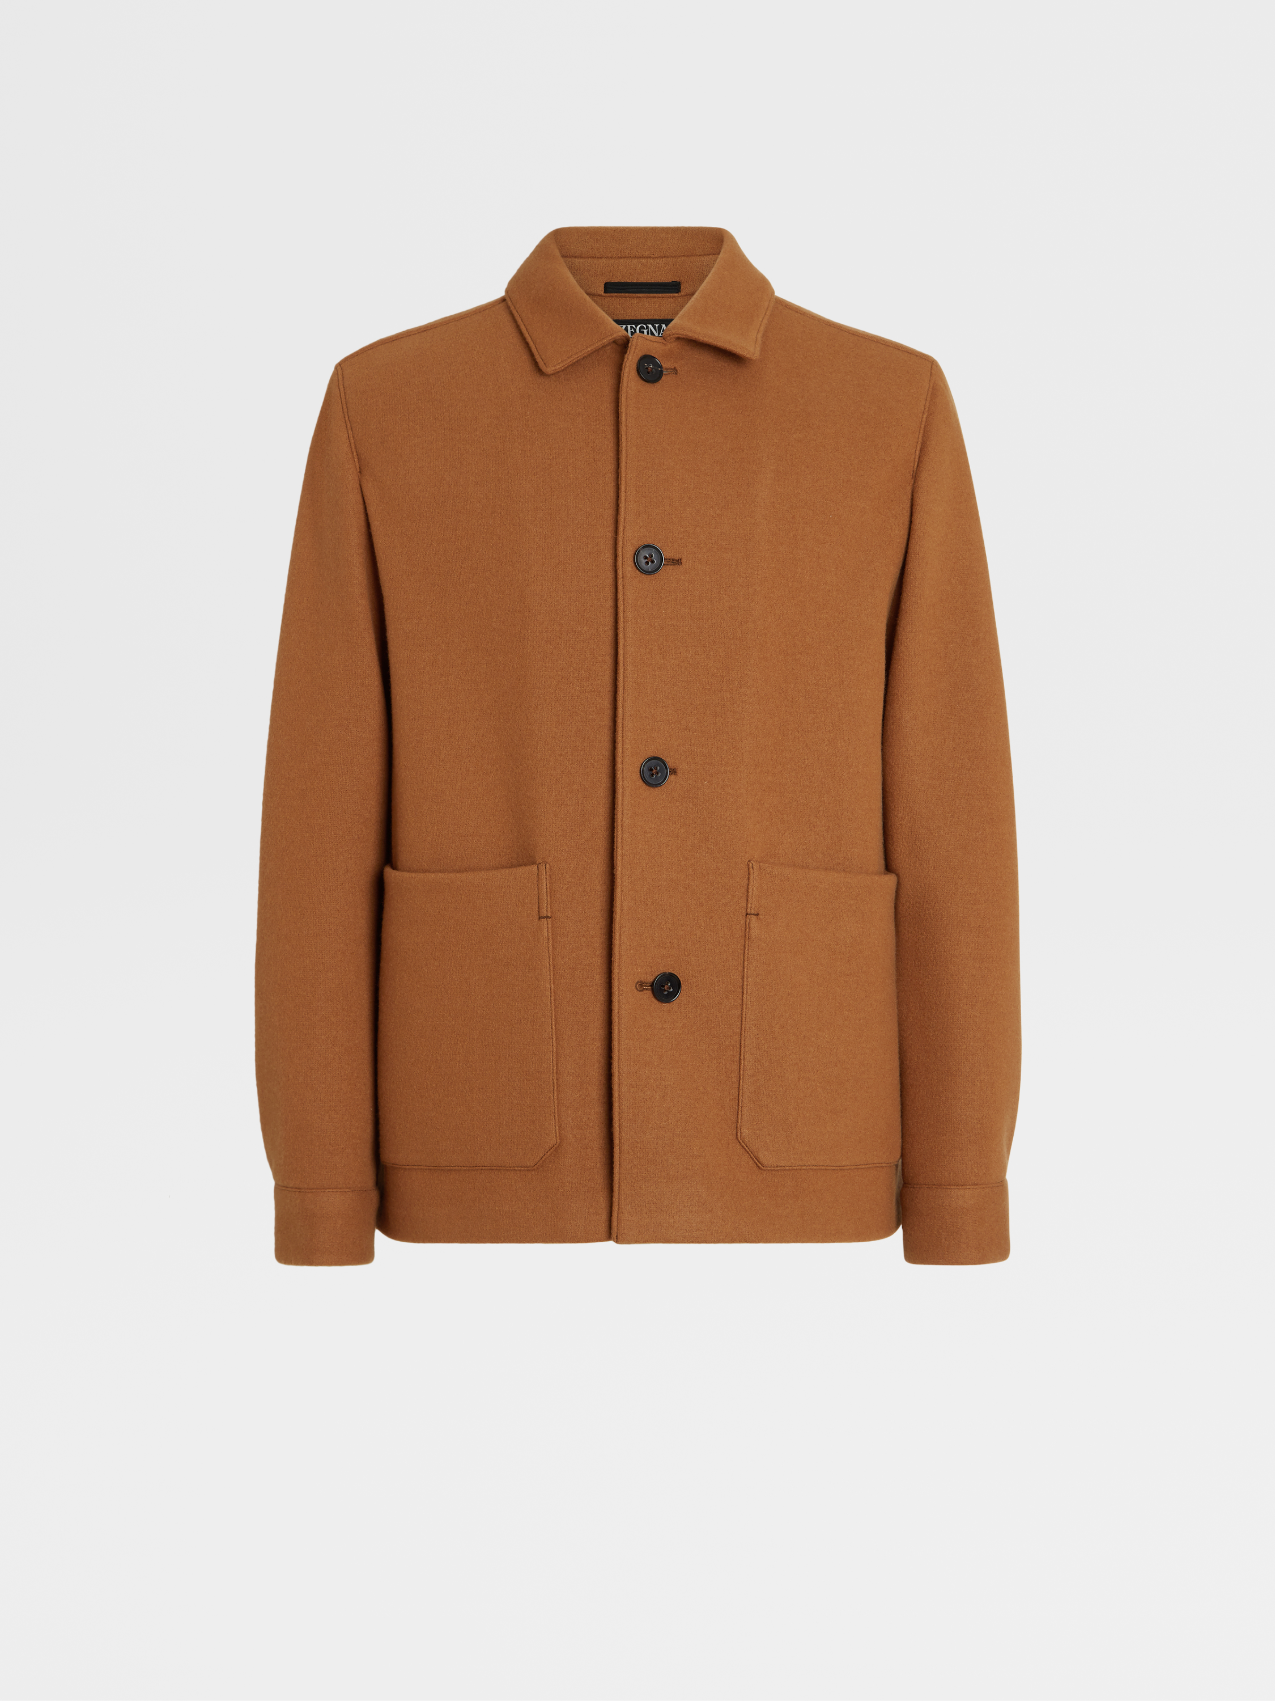 Vicuna Color Wool and Cashmere Chore Jacket